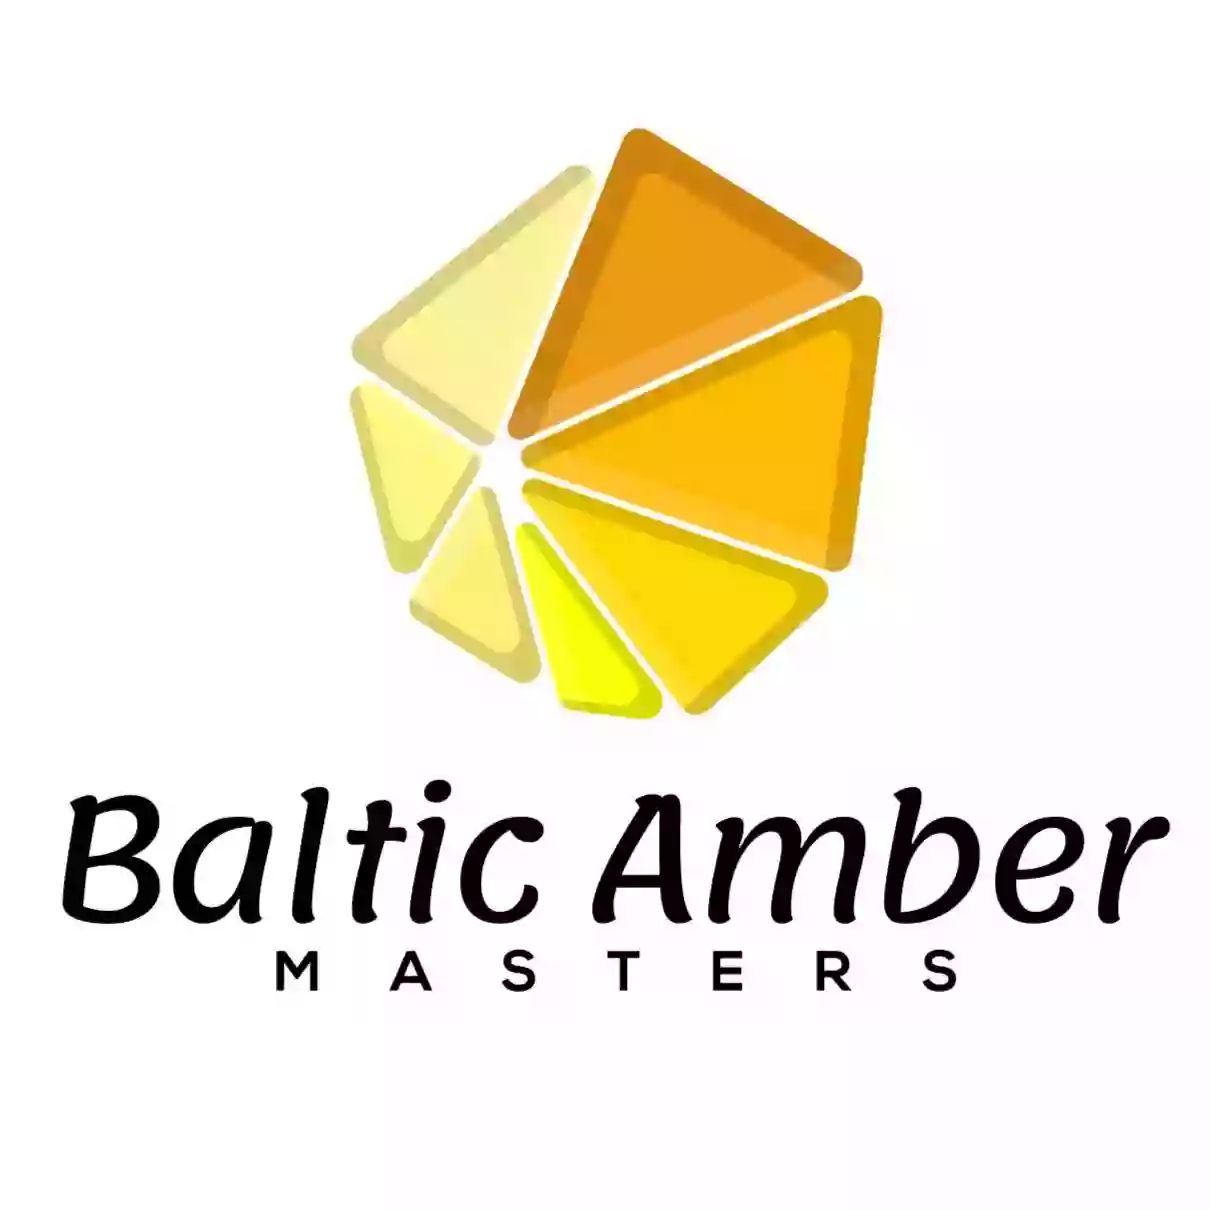 Baltic Amber Masters